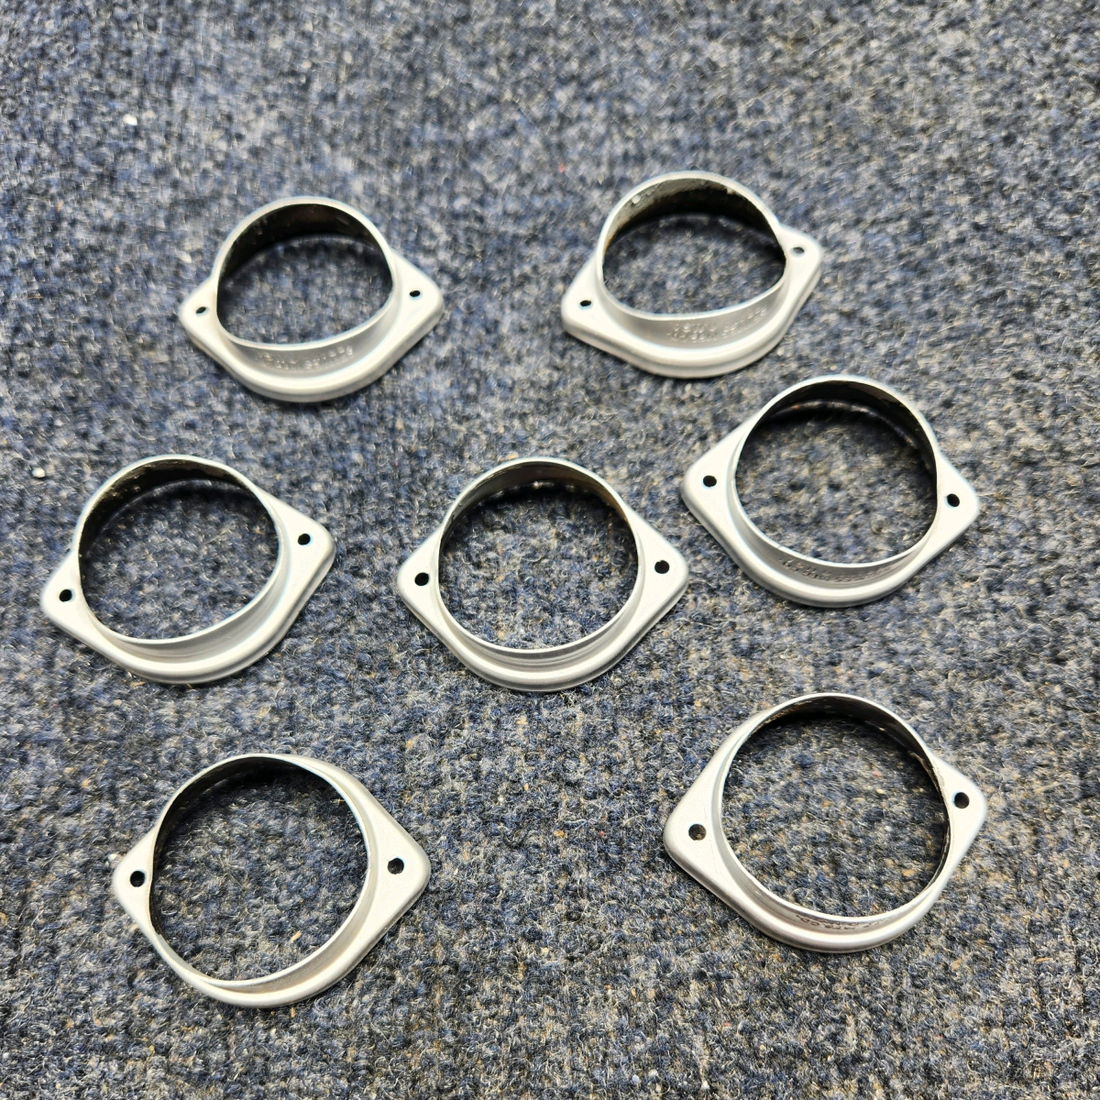 Used aircraft parts for sale, A425A Texas Several WHELEN TAIL STROBE LENS RETAINER PRICE PER EACH